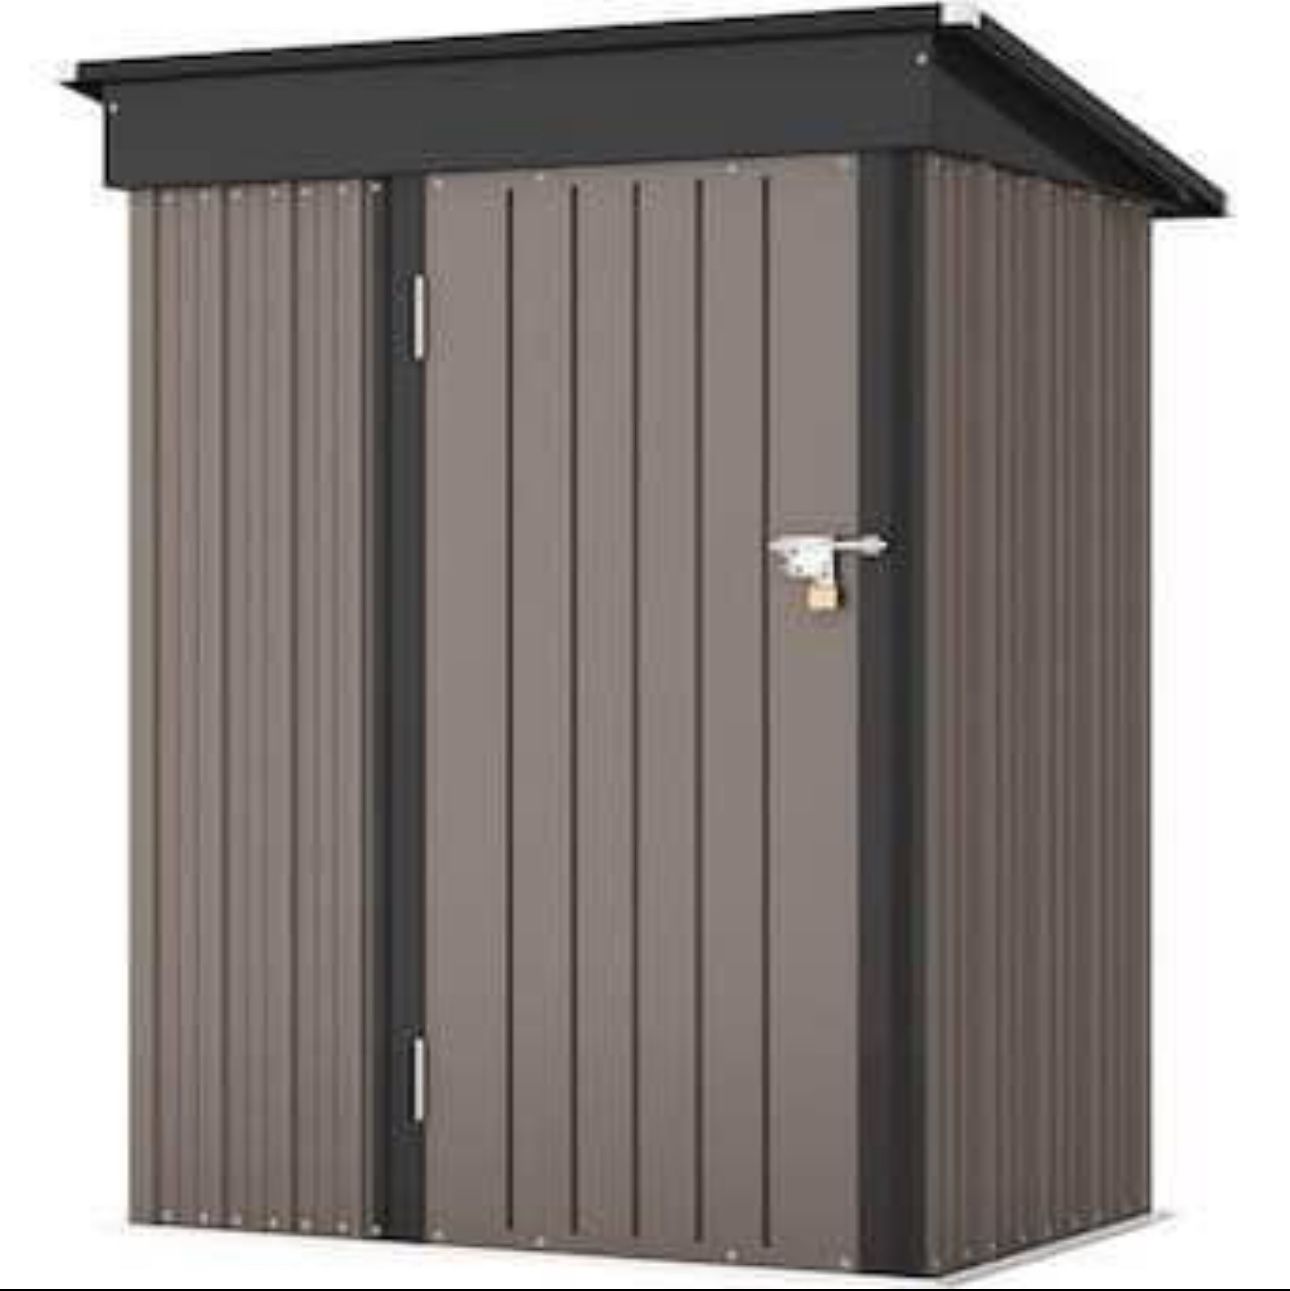 5 ft. W x 3 ft. D Outdoor Storage Metal Shed Utility Patio Shed for Garden and Backyard 15 sq. ft.